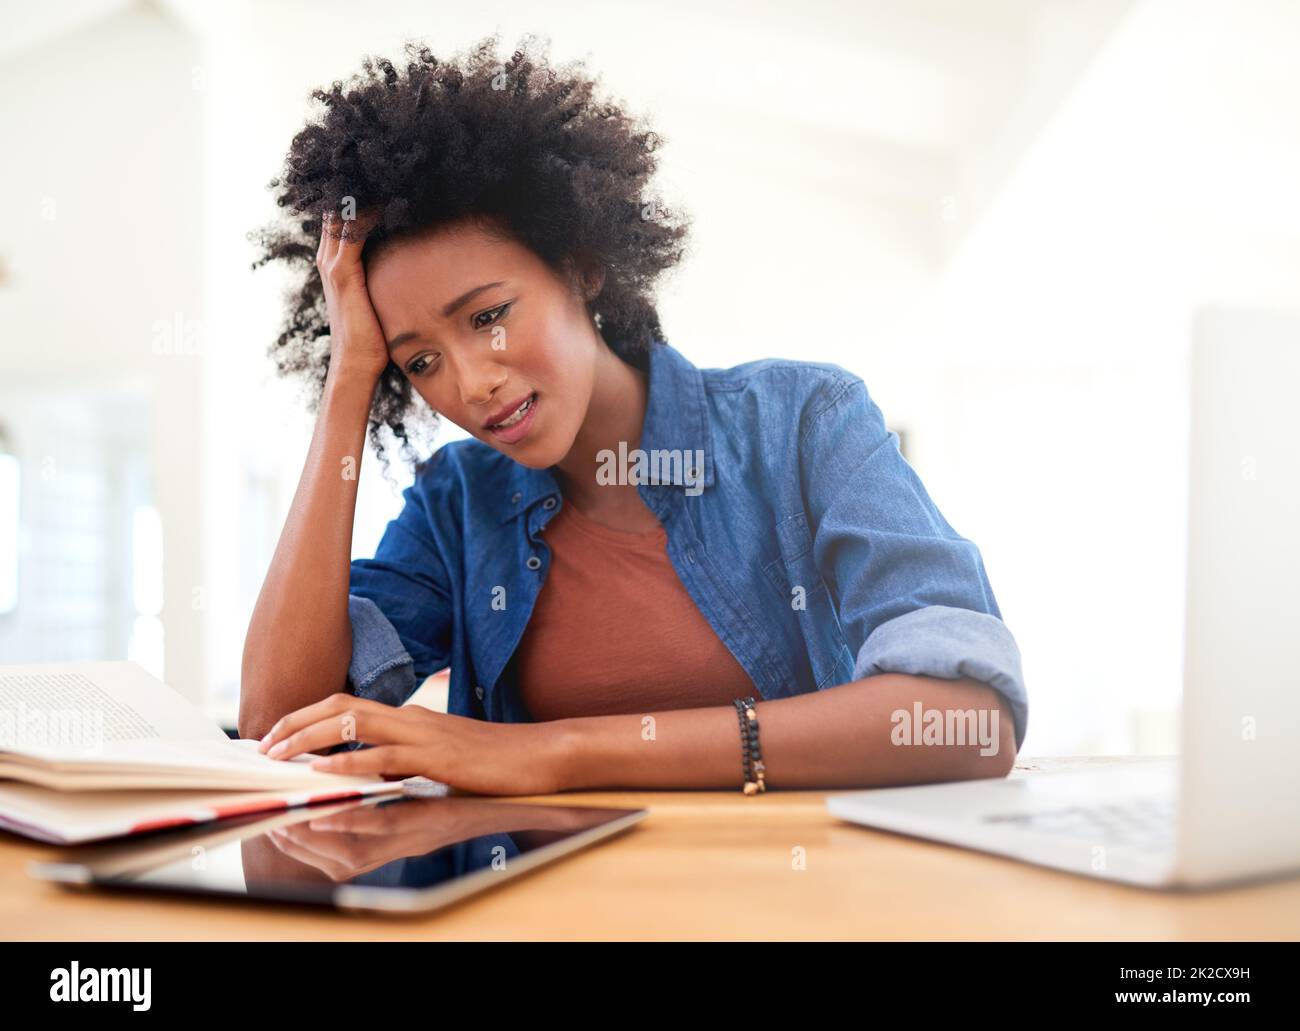 Work is stressing her out. Shot of an attractive young woman looking stressed while working from home. Stock Photo